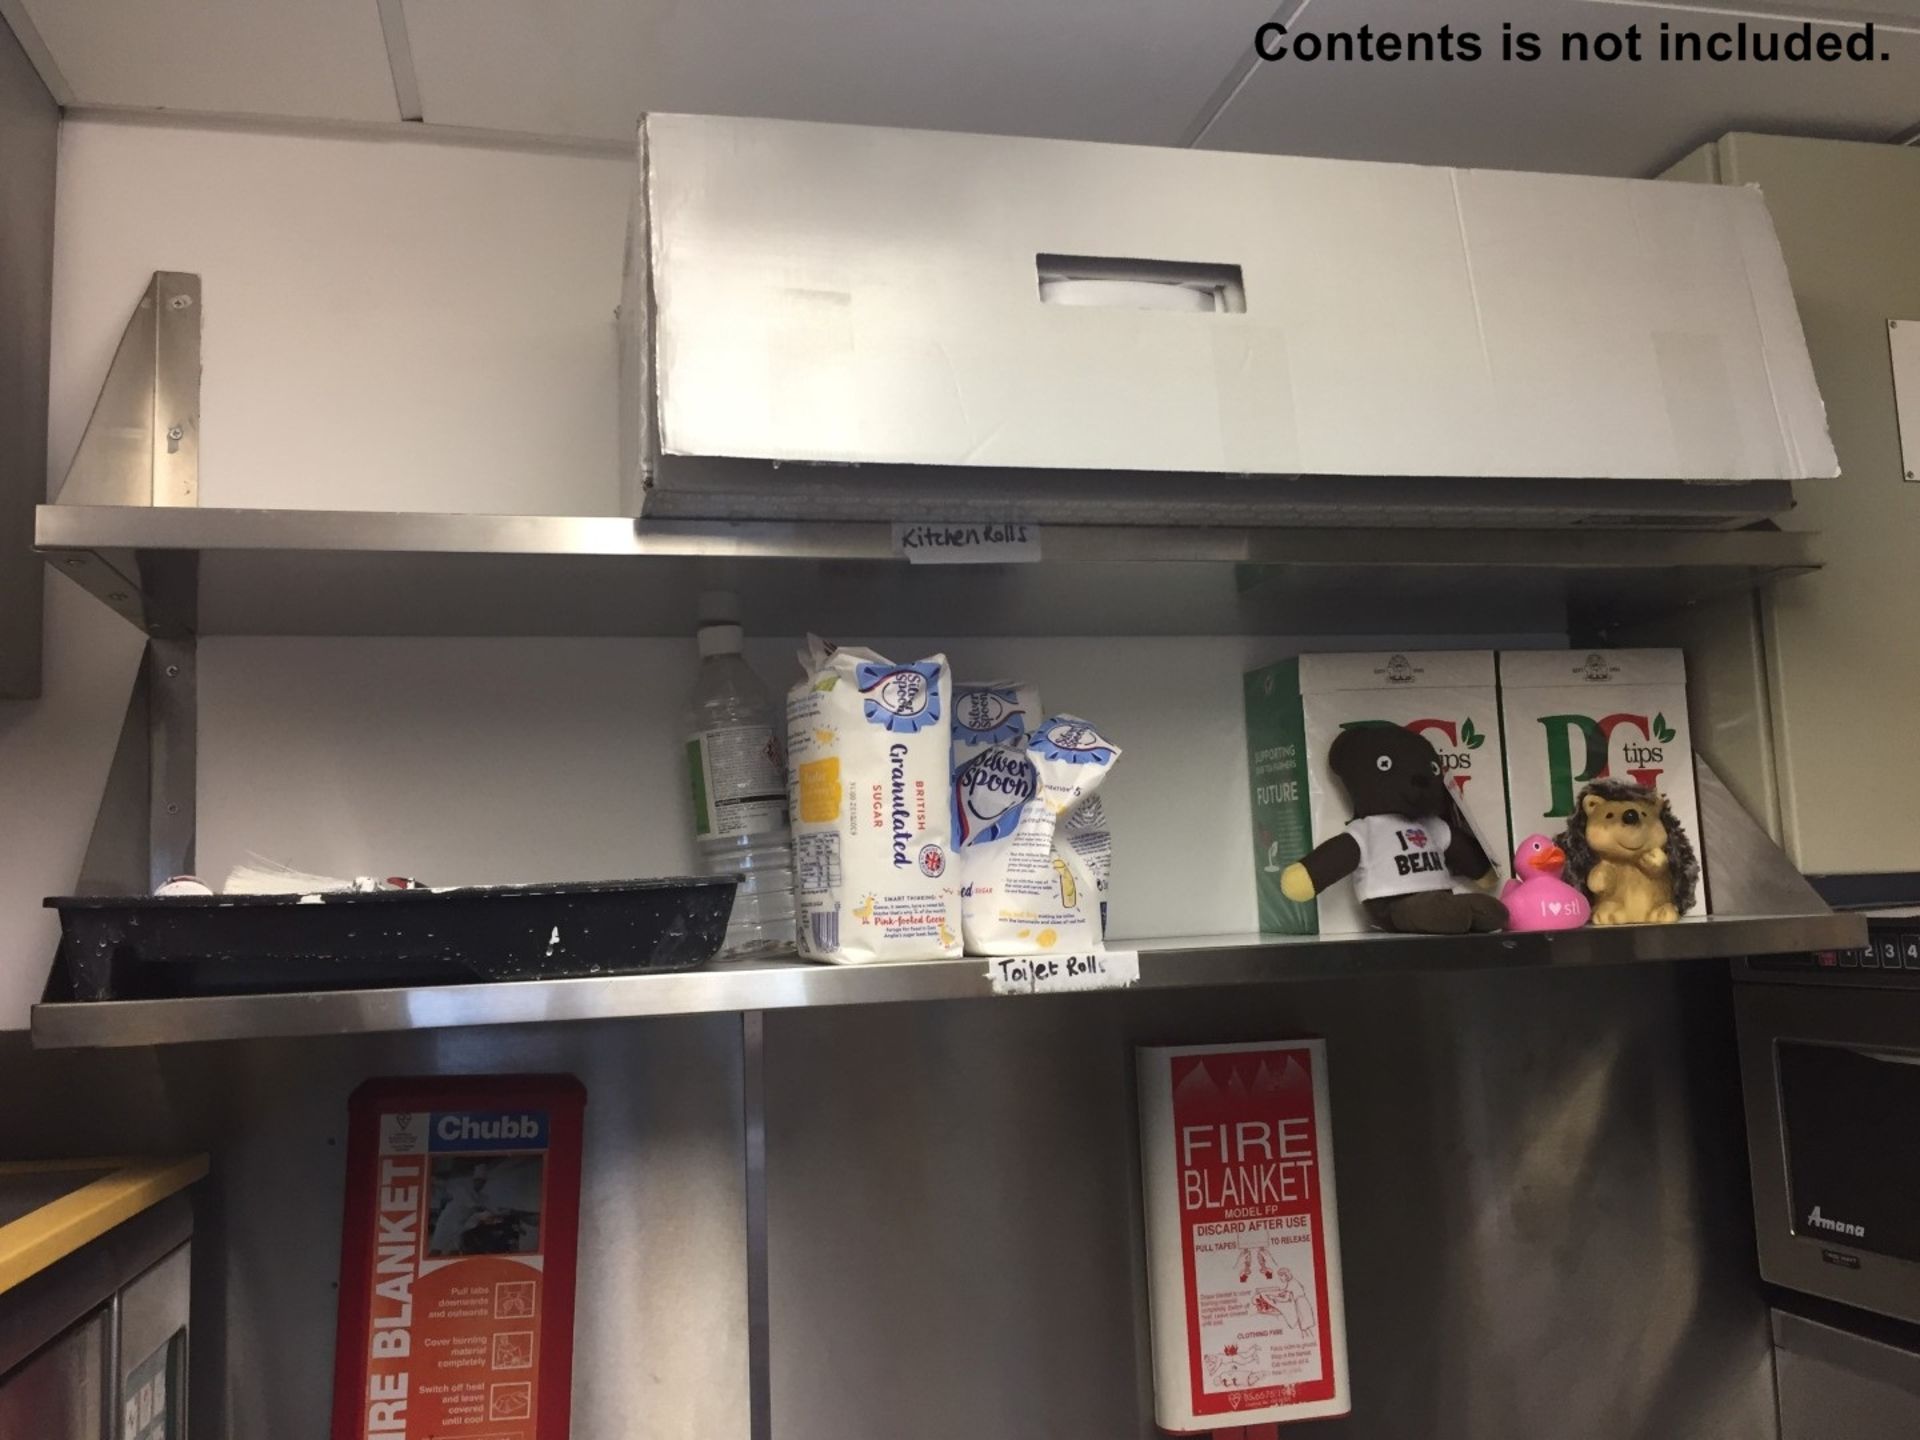 5 x Assorted Stainless Steel Shelves And 1 x Undercounter Cupboard - 6 Items In Total - Various - Image 2 of 5